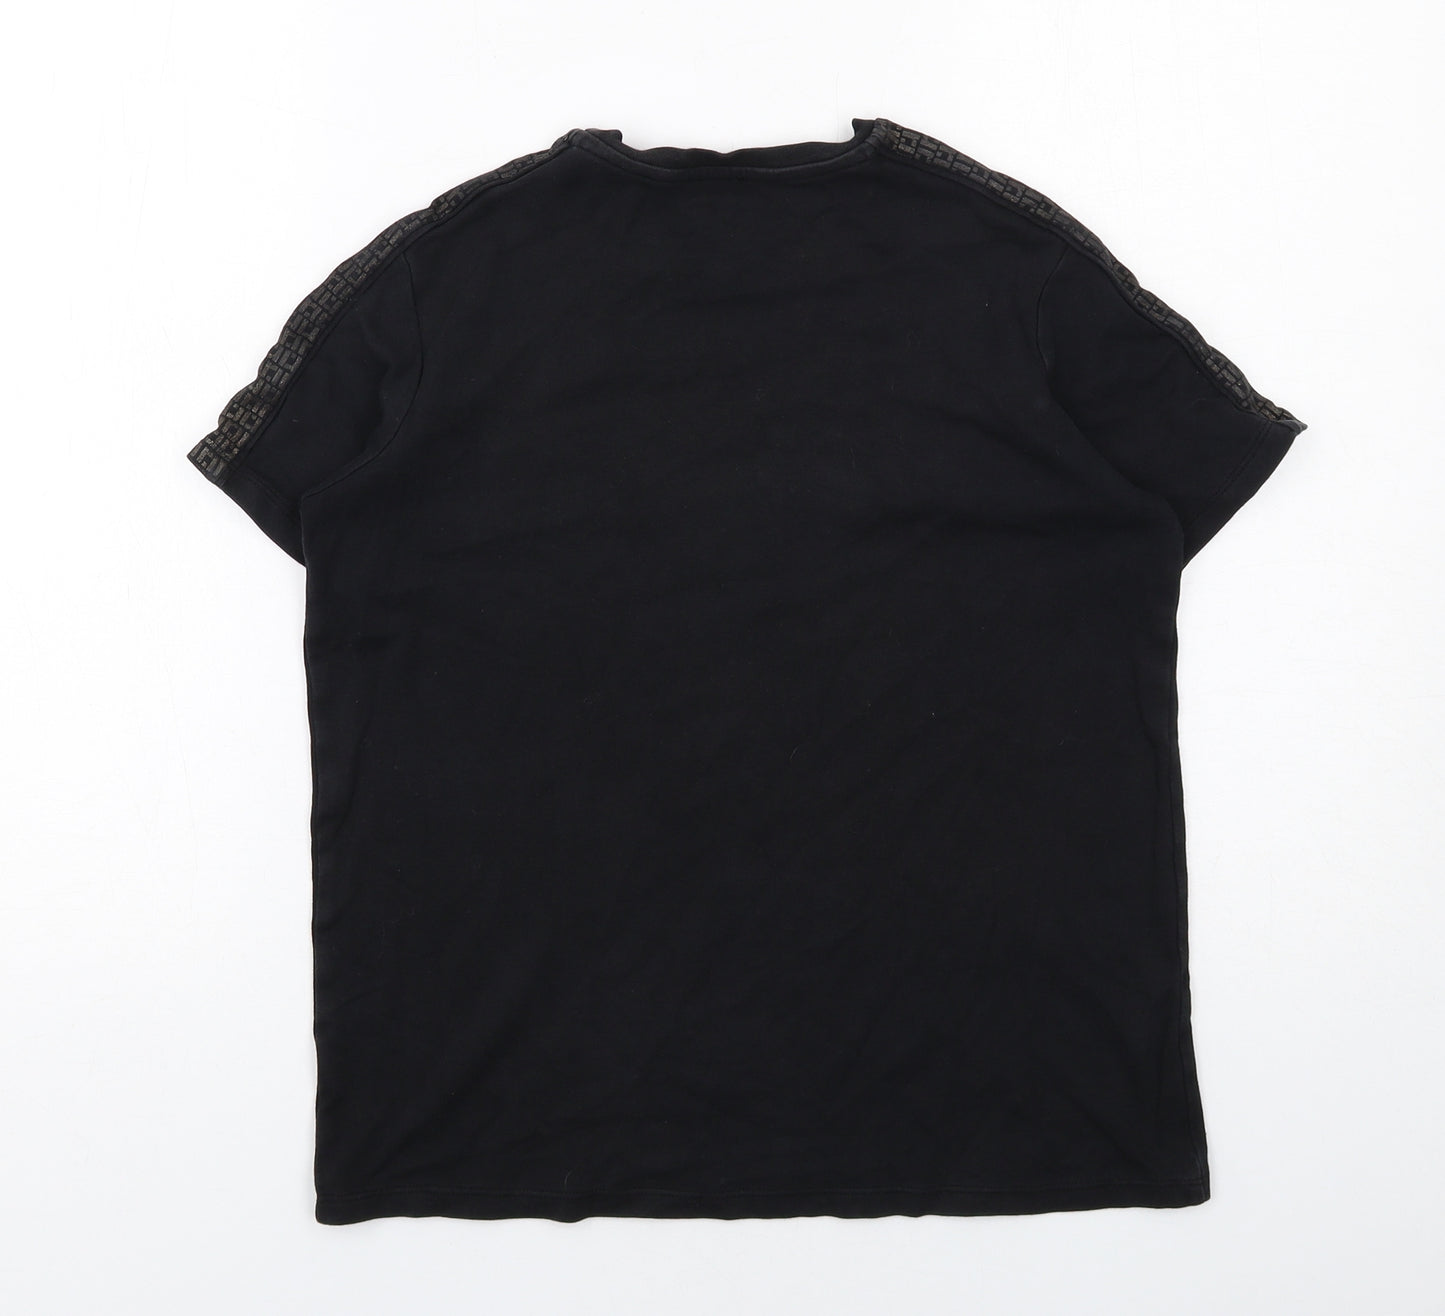 River Island Boys Black Cotton Basic T-Shirt Size 11-12 Years Round Neck Pullover